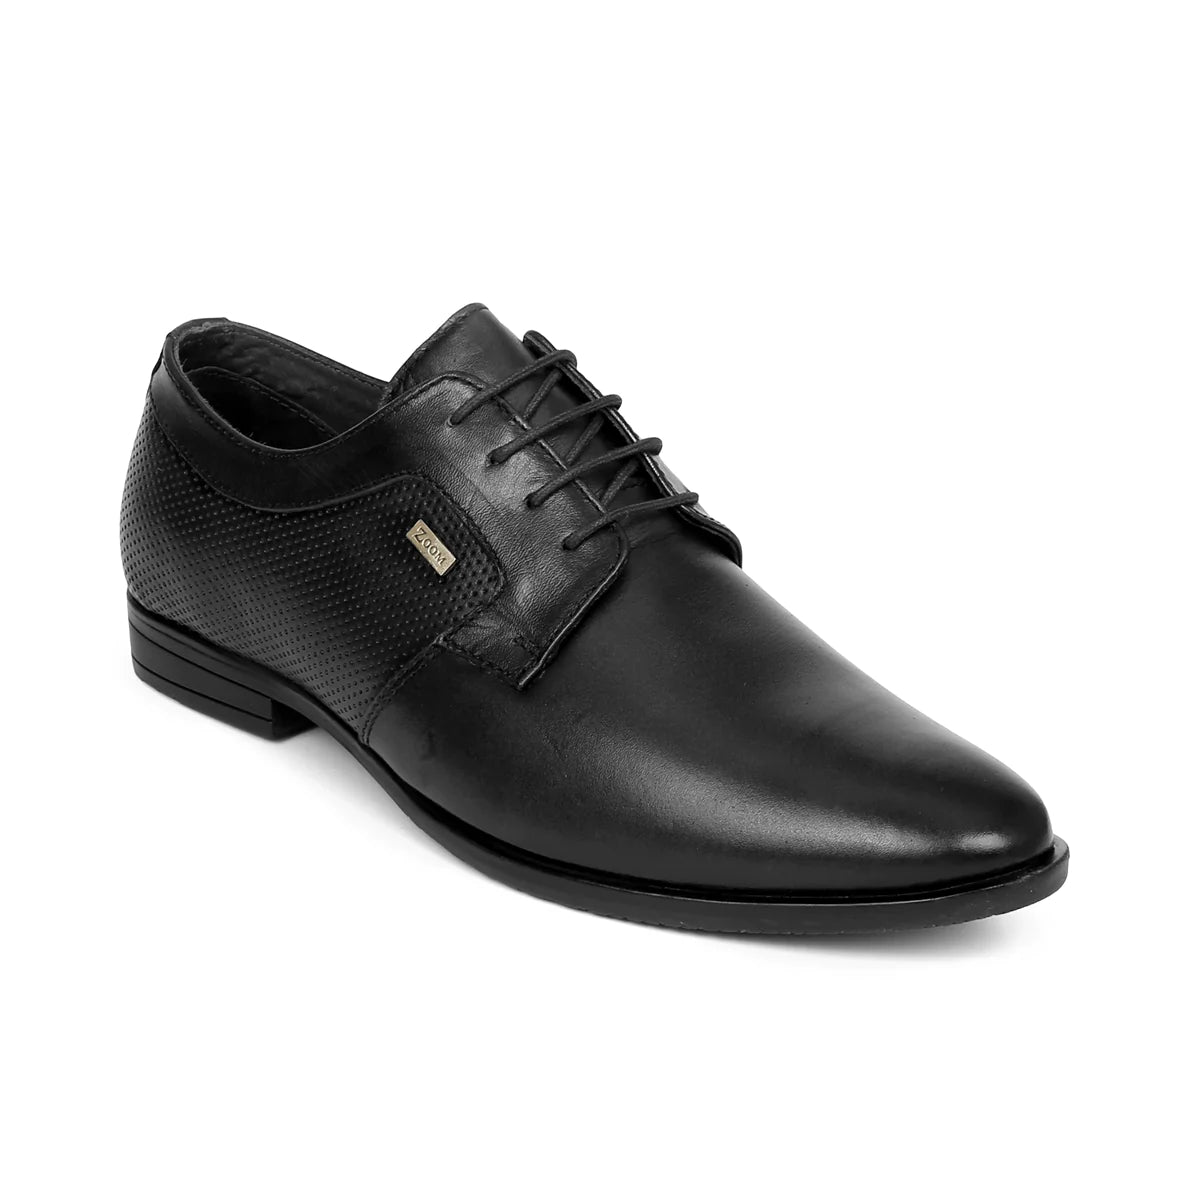 Buy Lace Up Formal Leather Shoes for Men S – 3270 – Zoom Shoes India